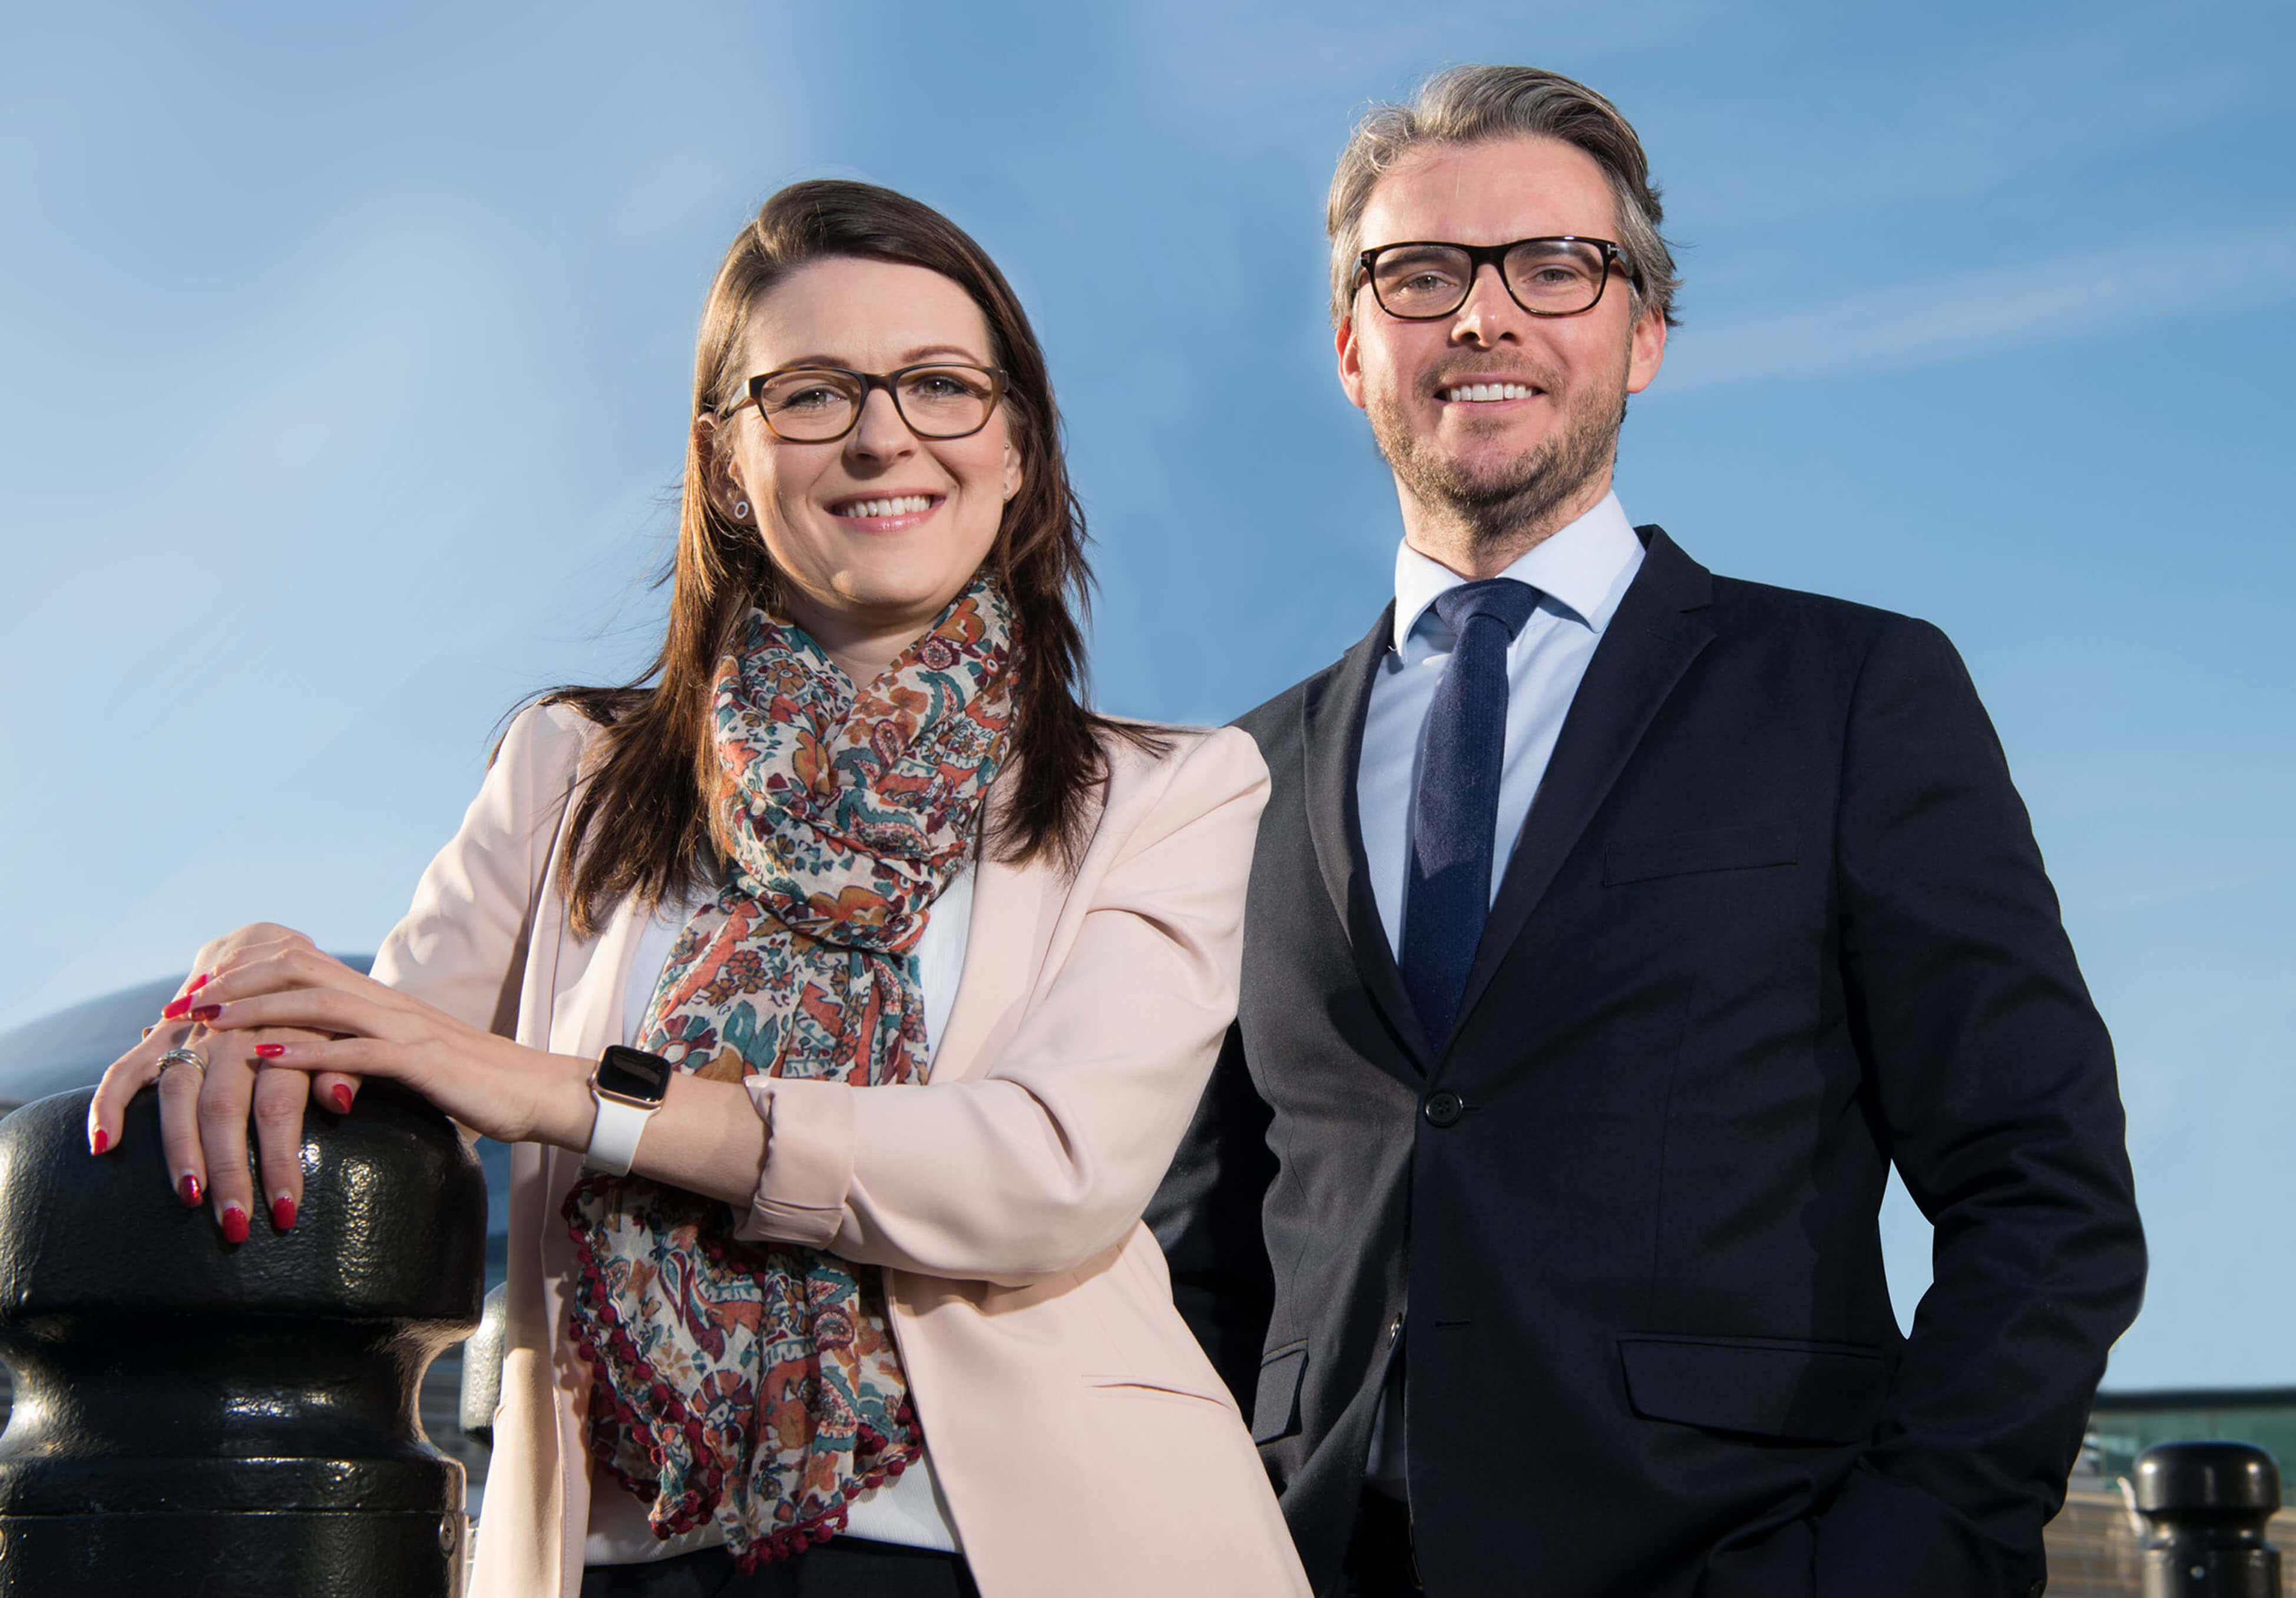 Aberdein Considine strengthens Lender Services with senior appointments